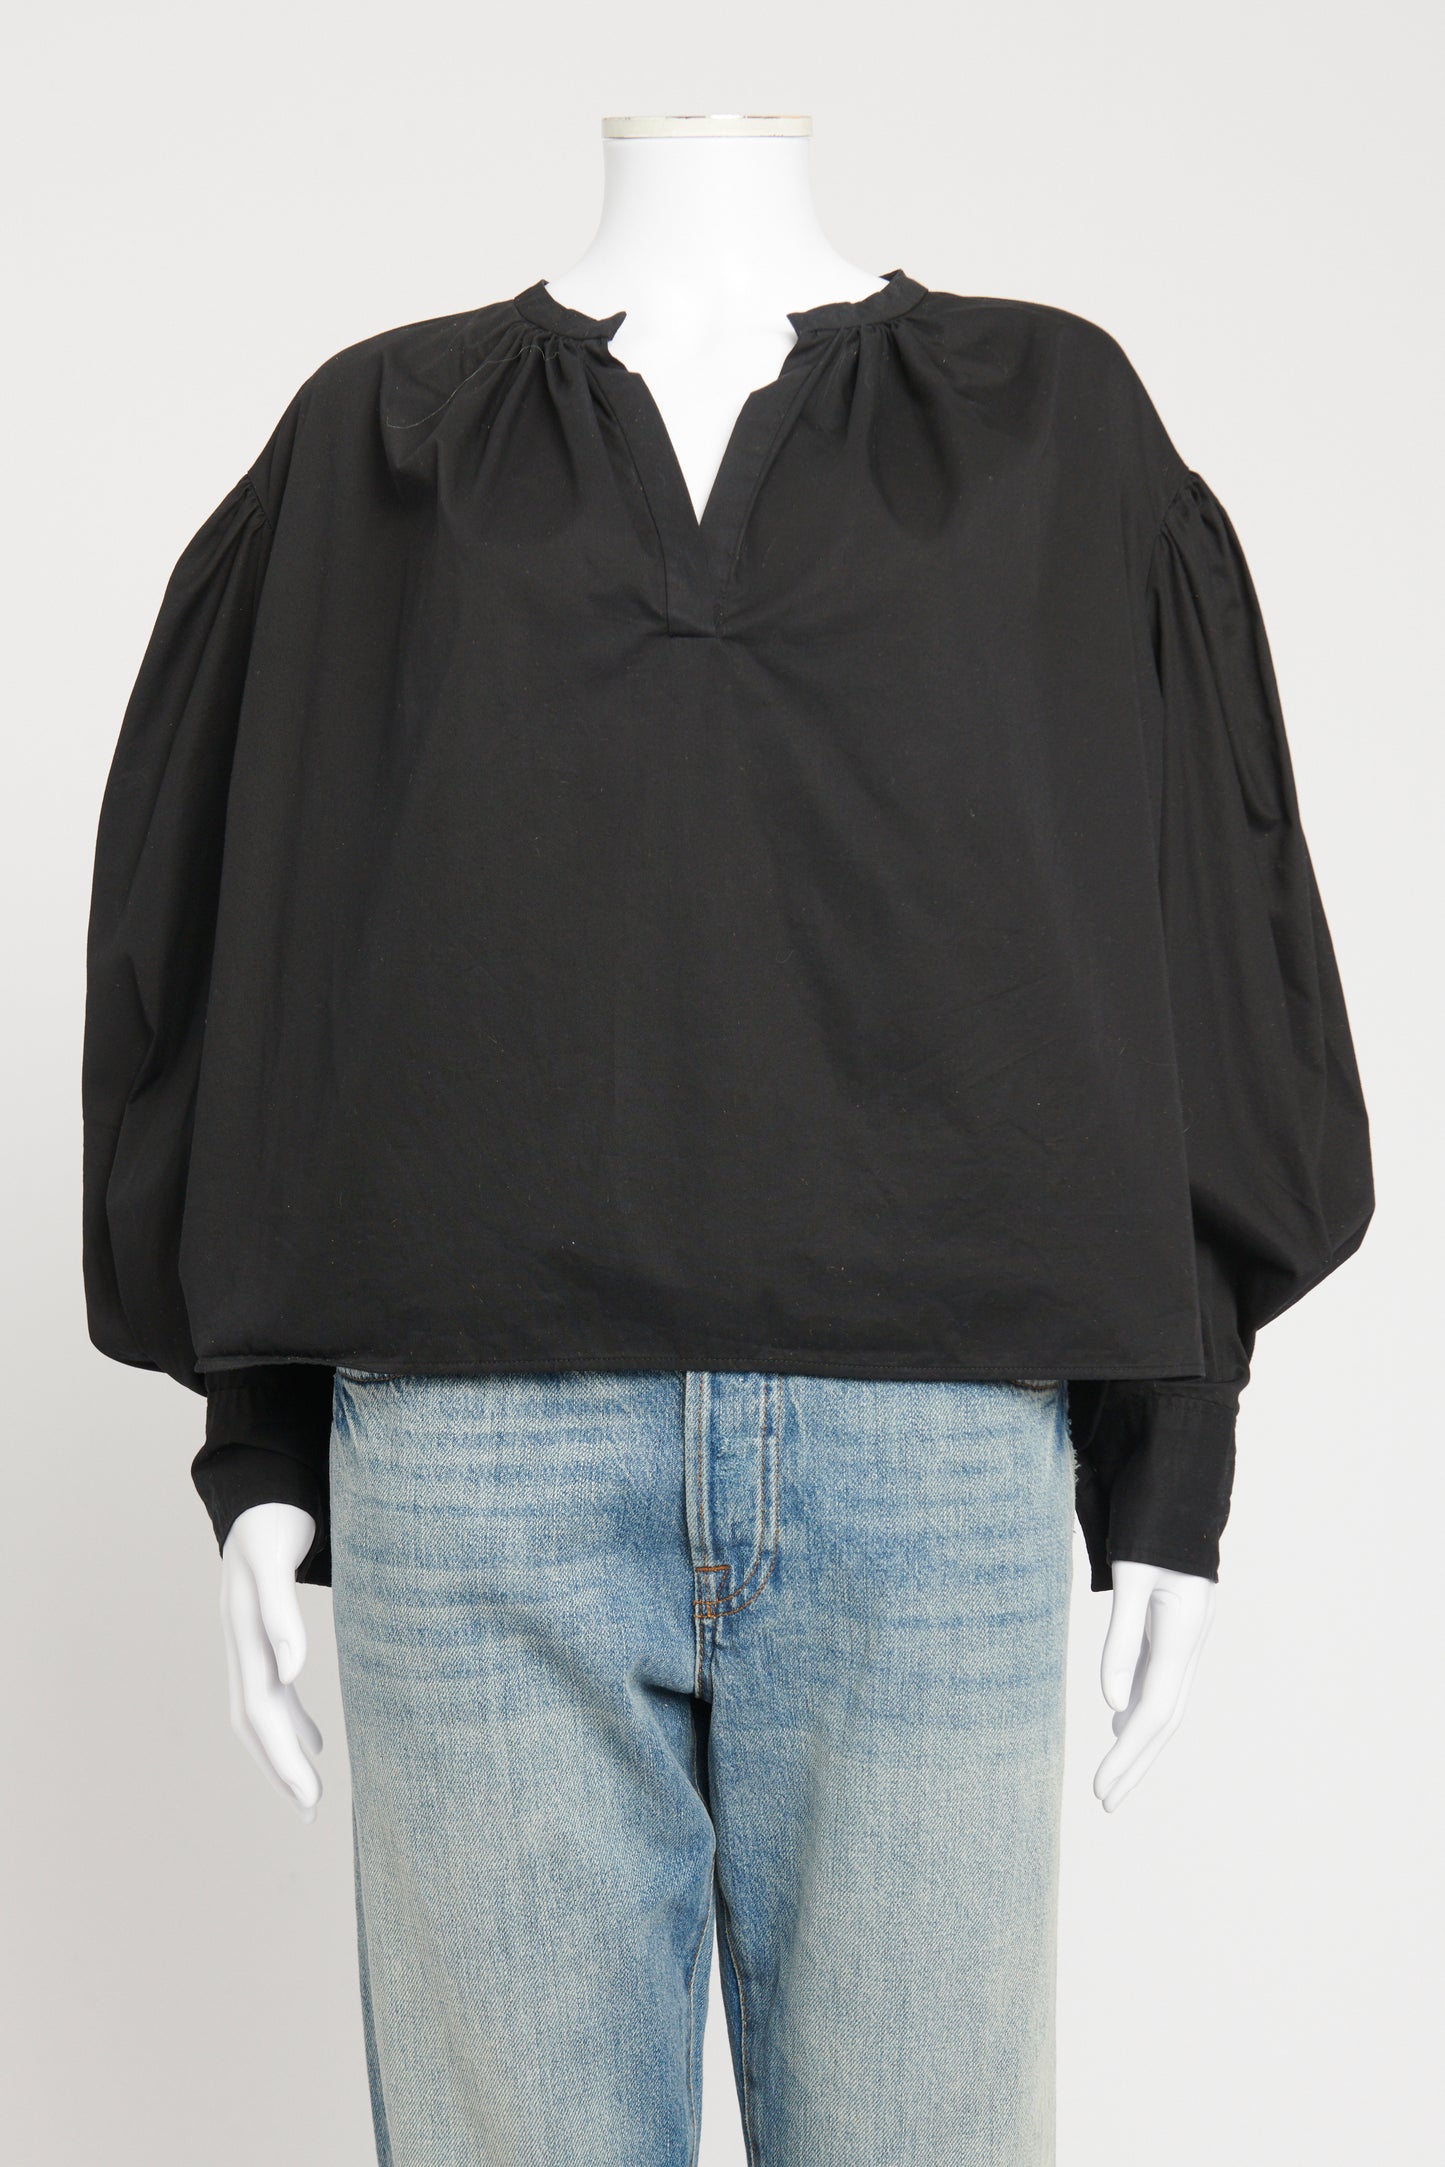 Black Cotton Peasant Style Preowned Top